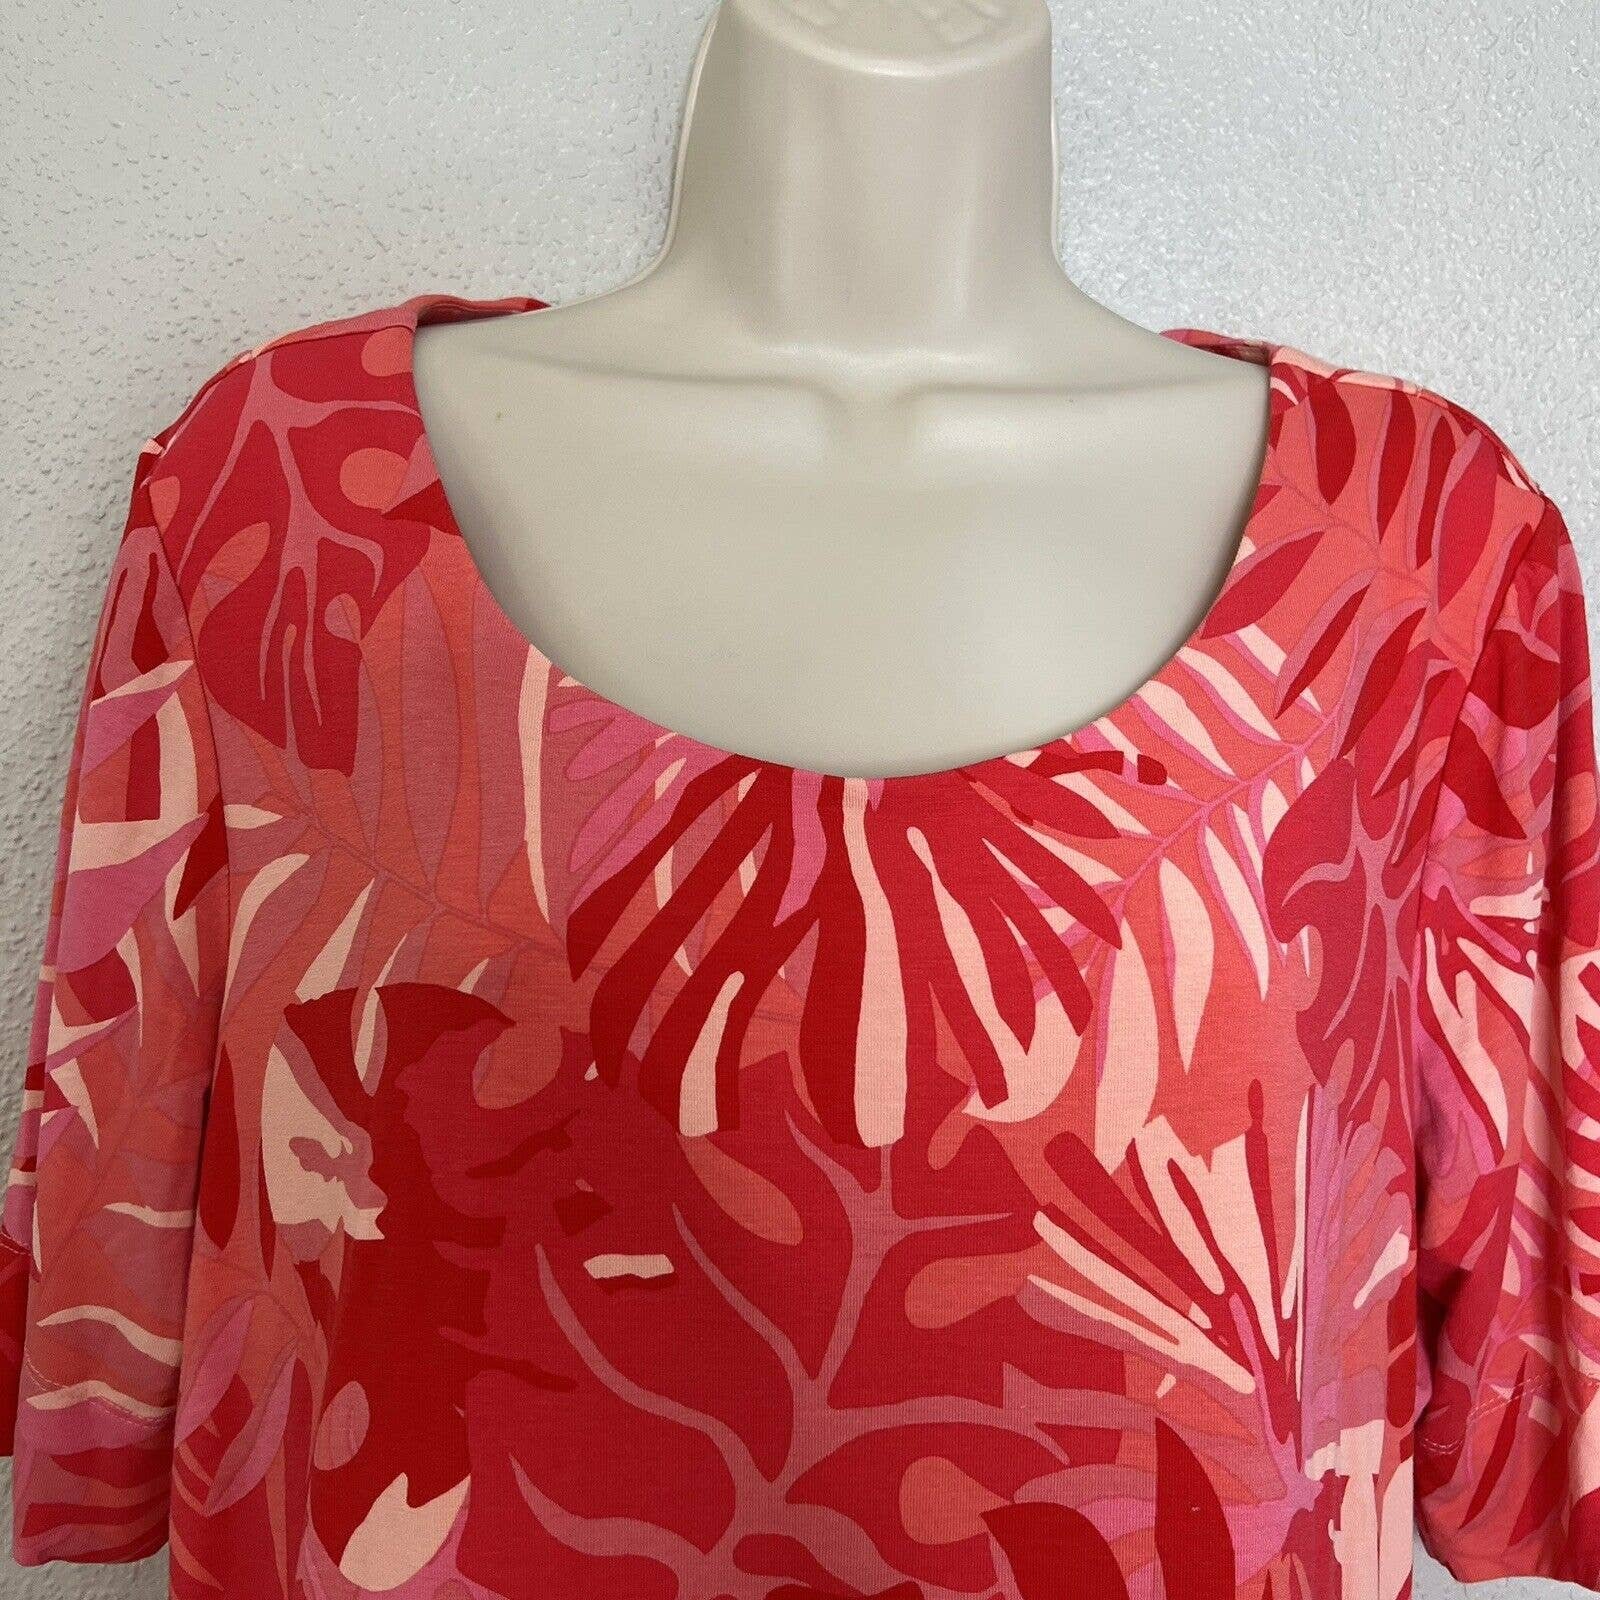 Simple Chicos Tropical Print Knit Top Shirt 2 Large KyrBQ0ZSw just buy it